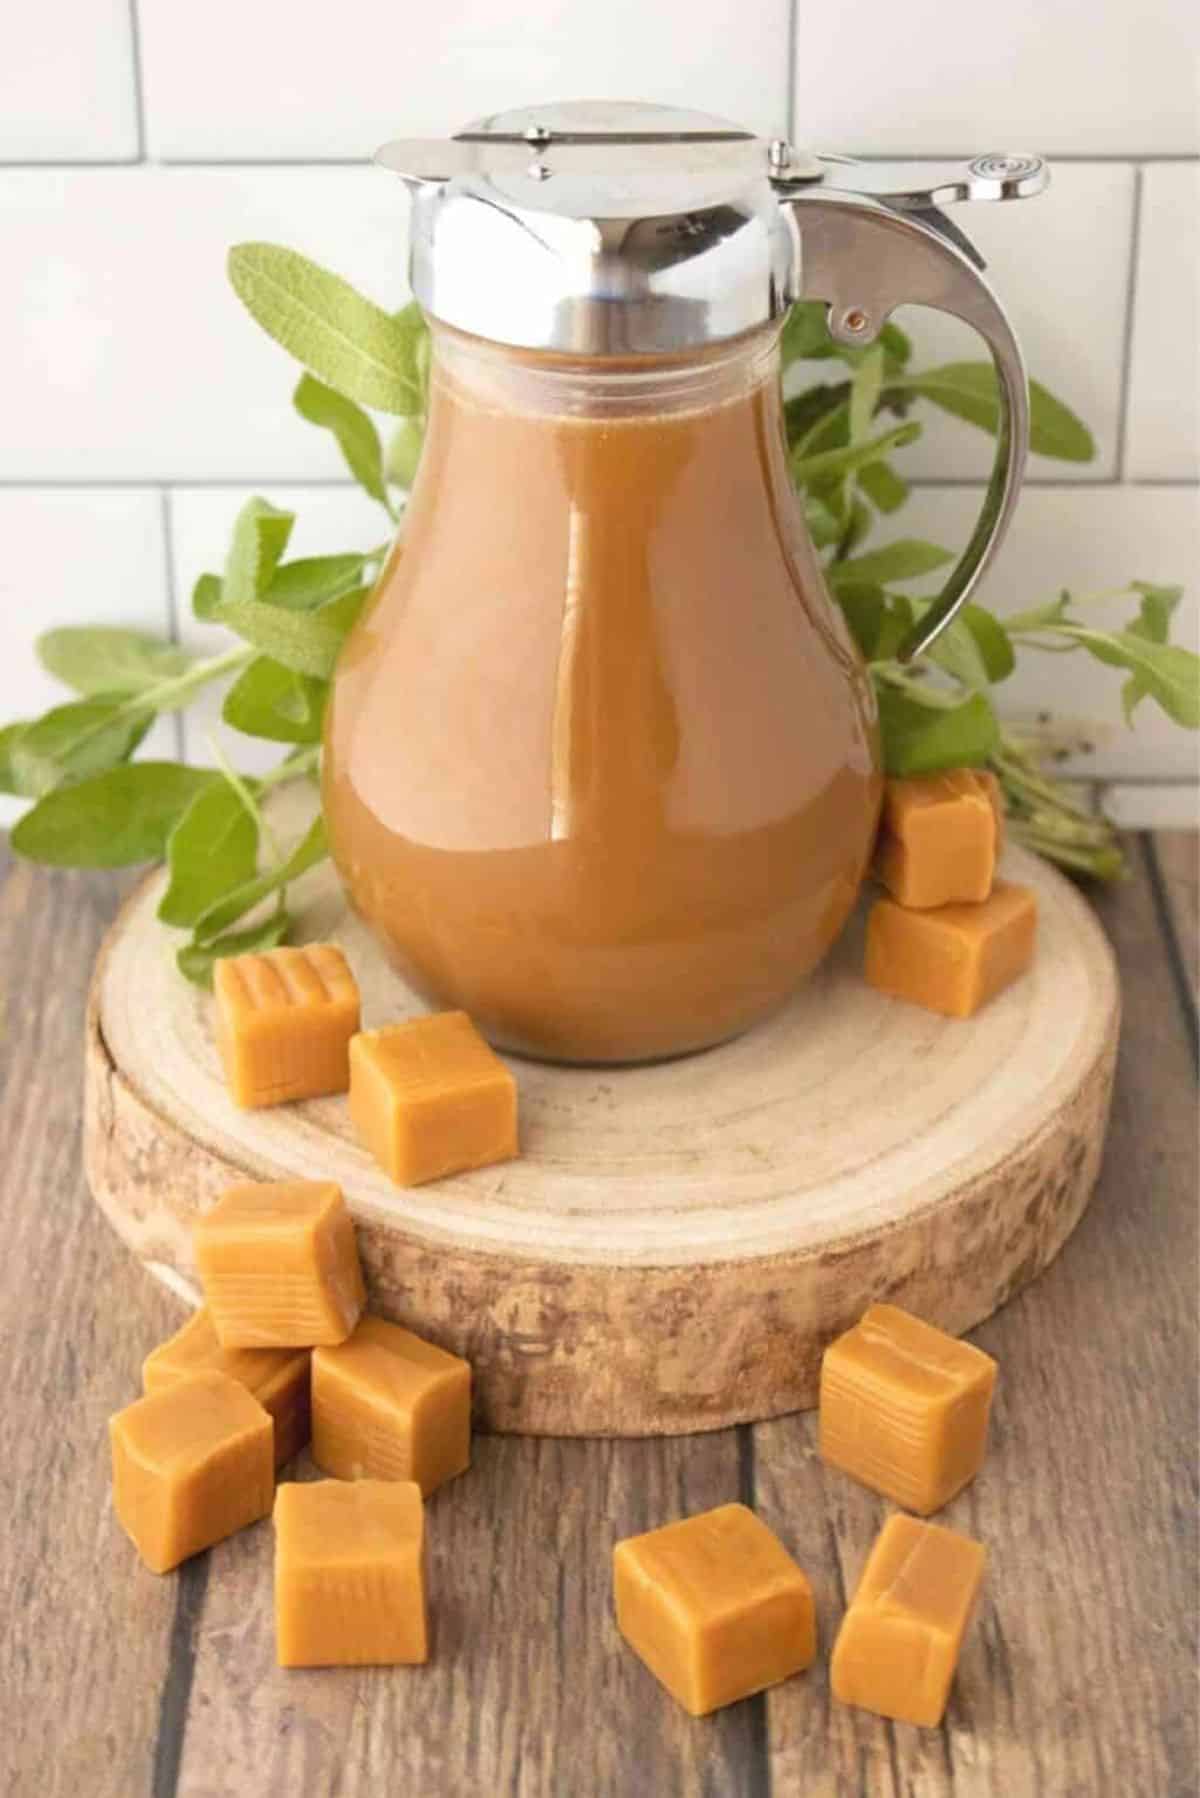 Caramel Syrup in a glass pitcher on a wooden board.